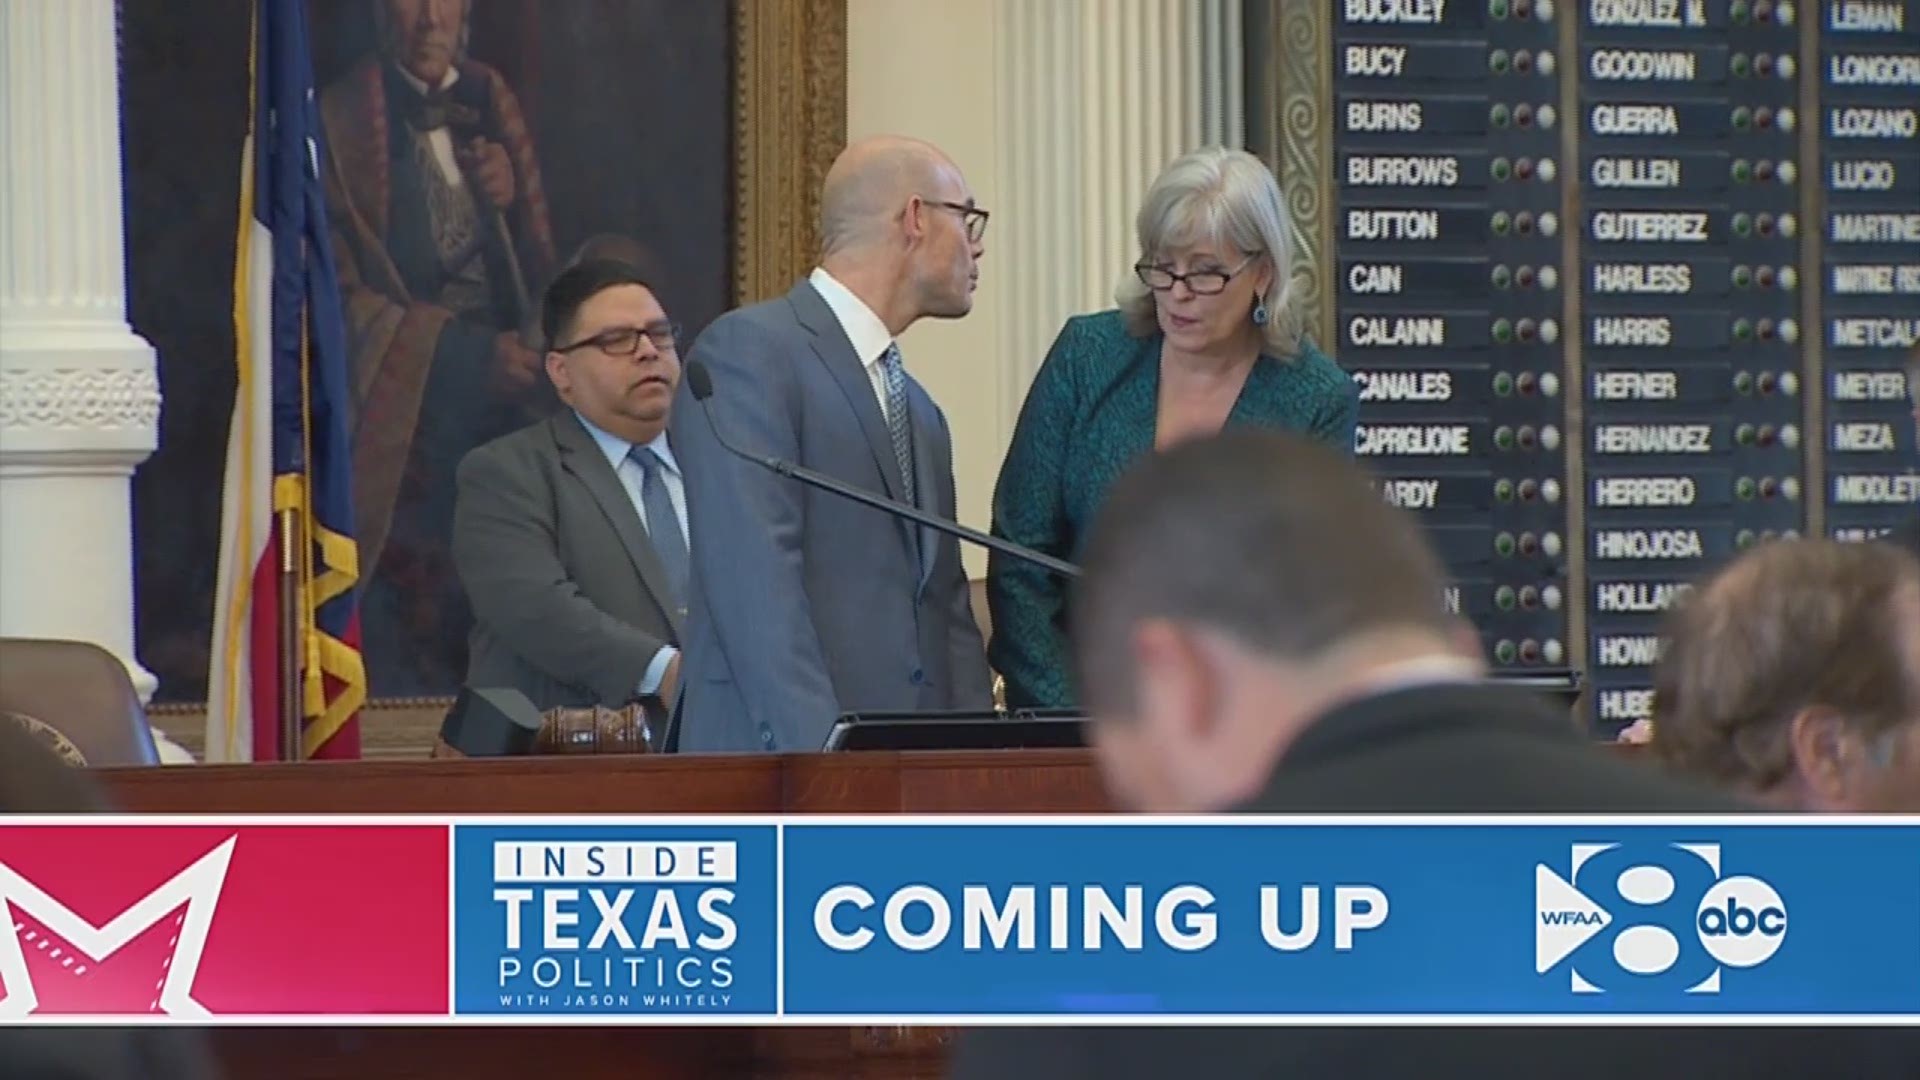 Inside Texas Politics began with the House Democrats’ impeachment inquiry of President Donald Trump. Congress returns from recess this week.